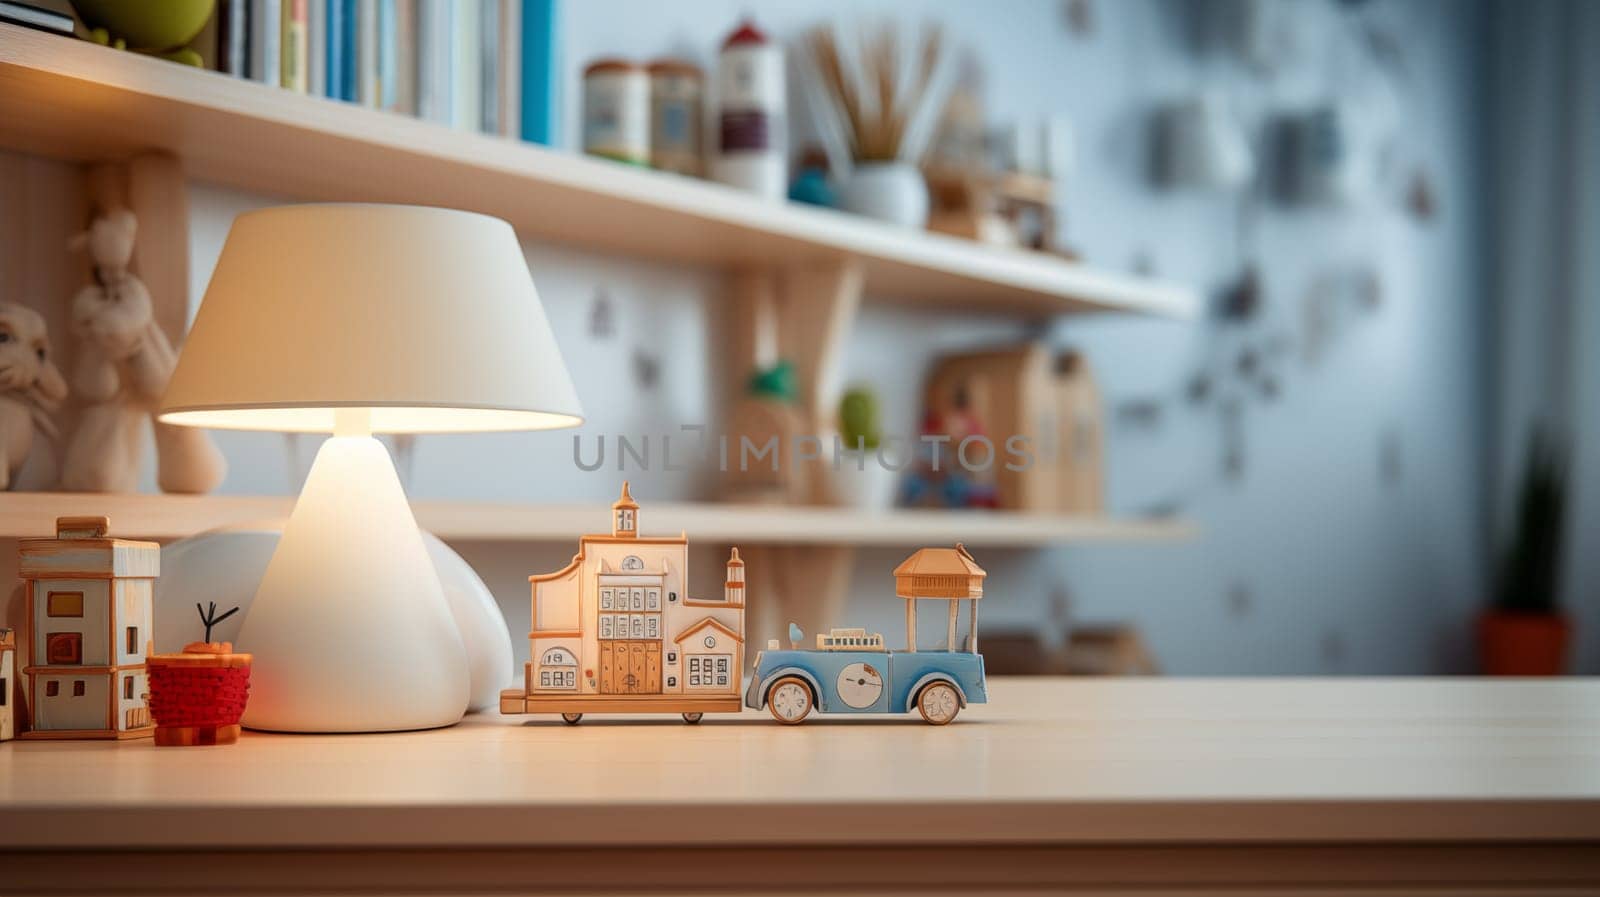 Glowing lamp and wooden toys on a shelf in a child's room on a table, with a cozy ambiance.